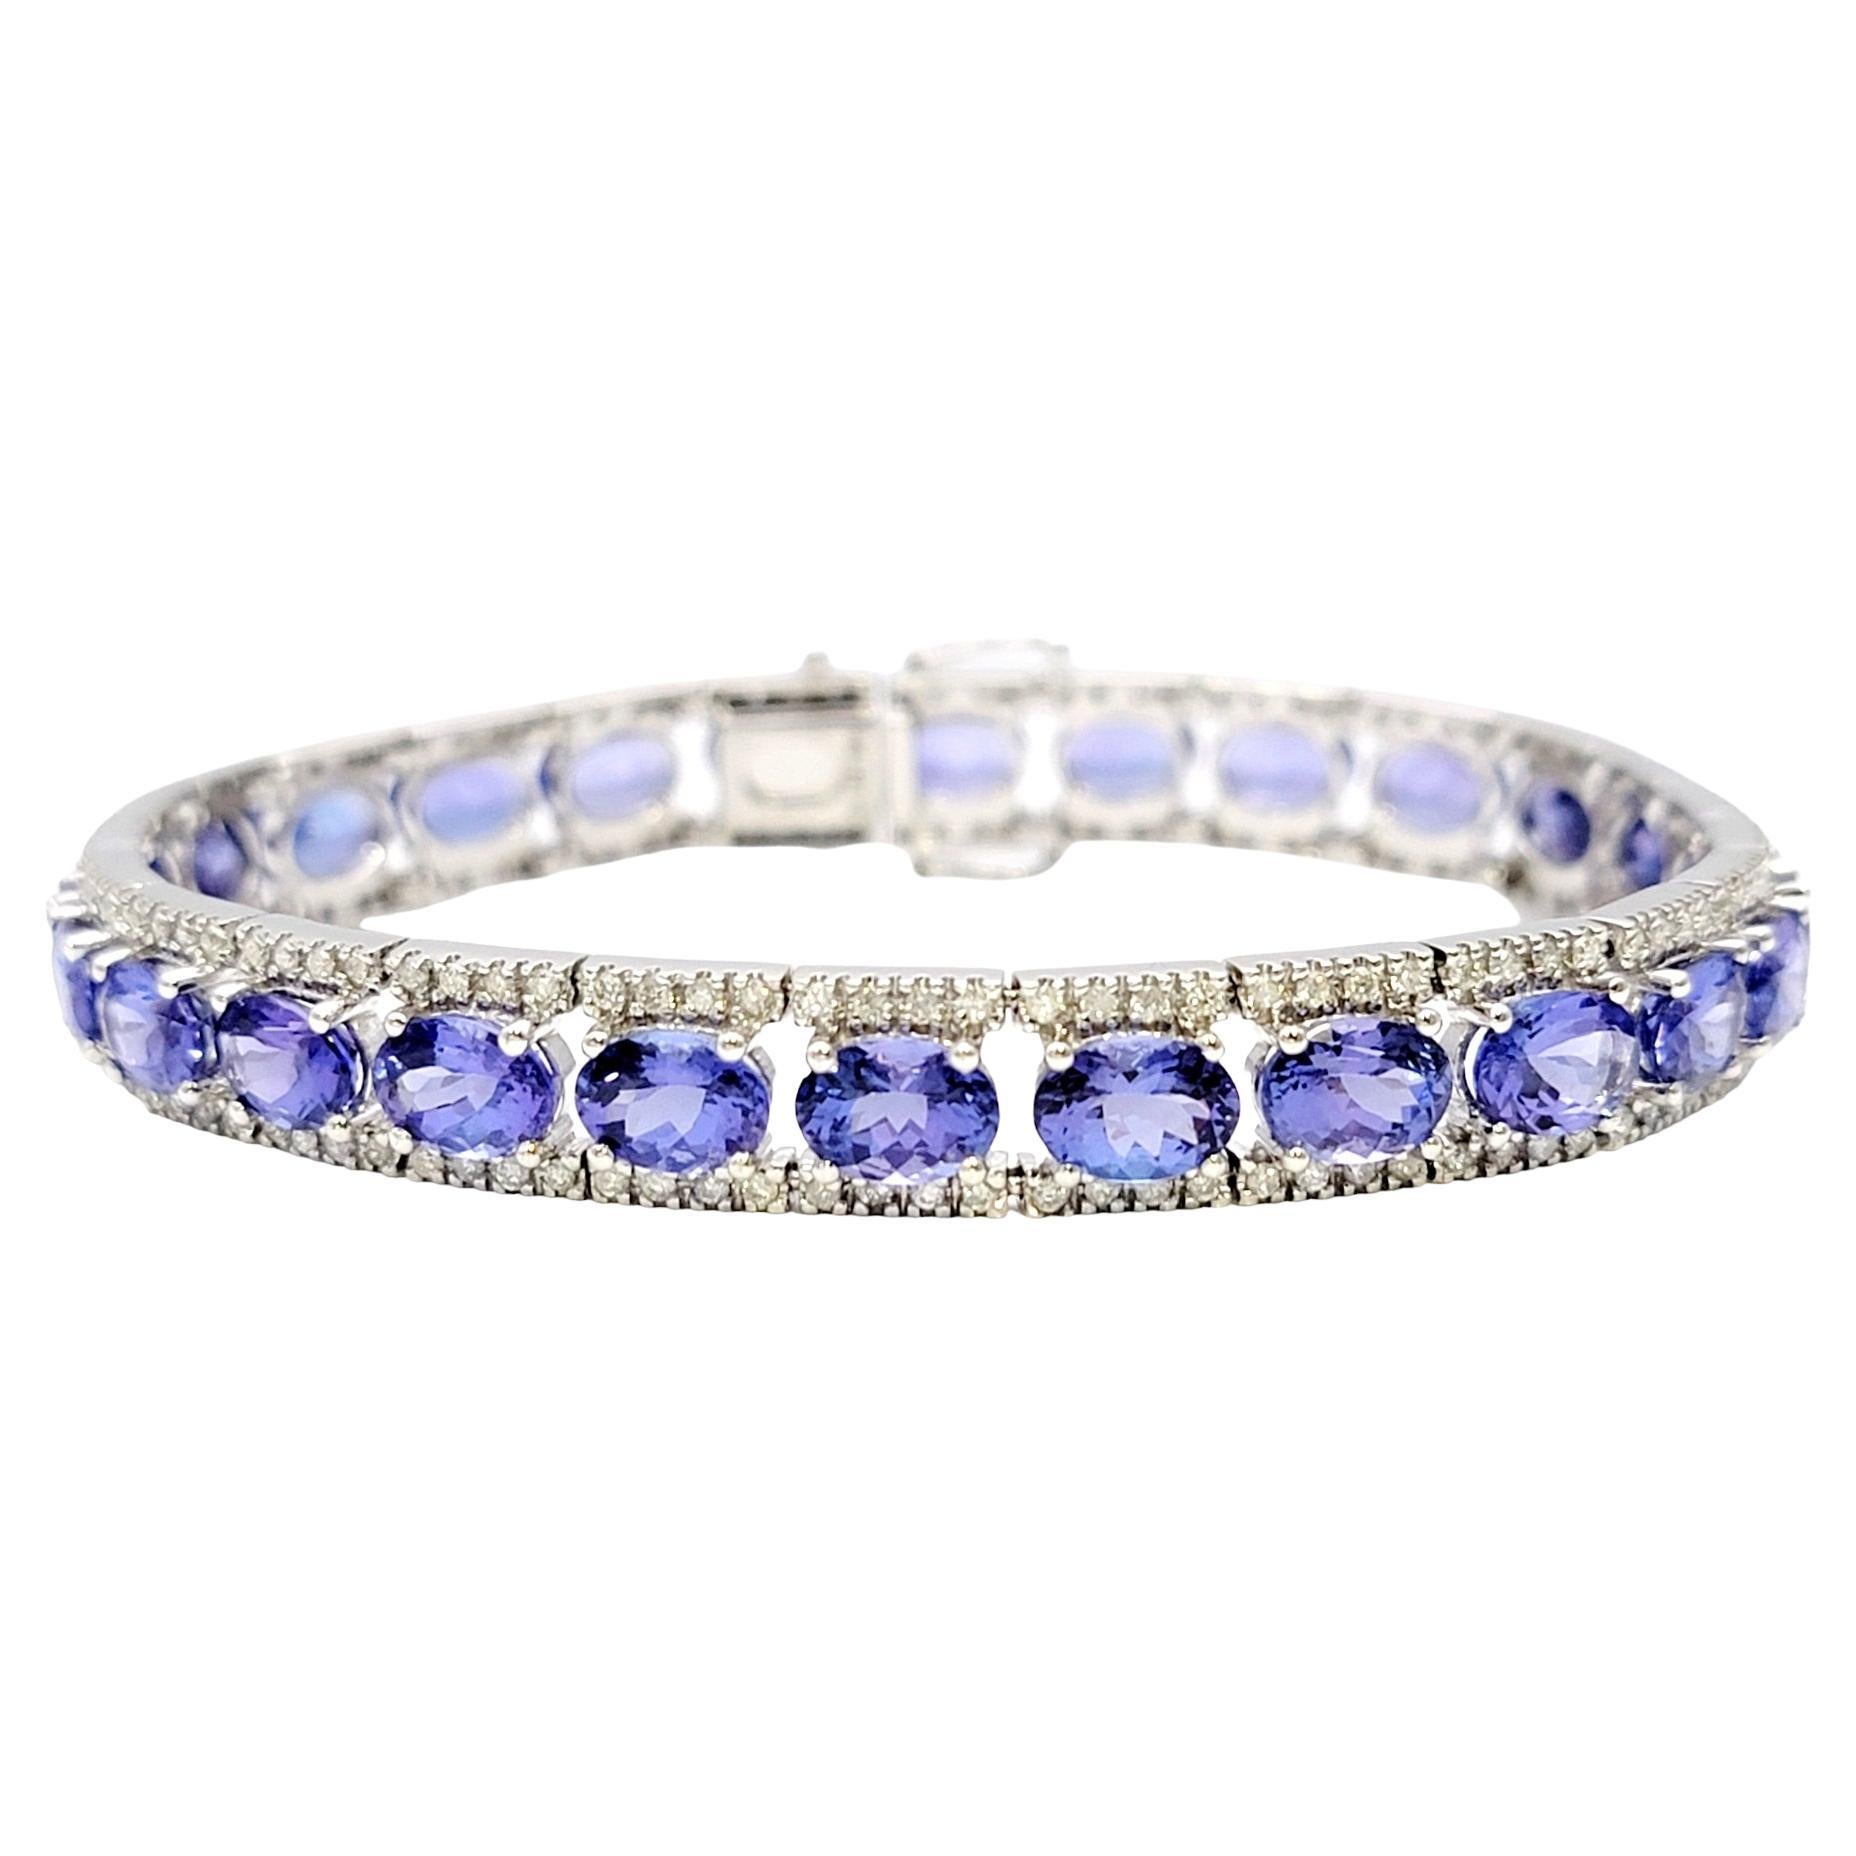 Exquisite 925 Sterling Silver Chanel Bracelet with Brilliant White Zircon Stone - Timeless Elegance